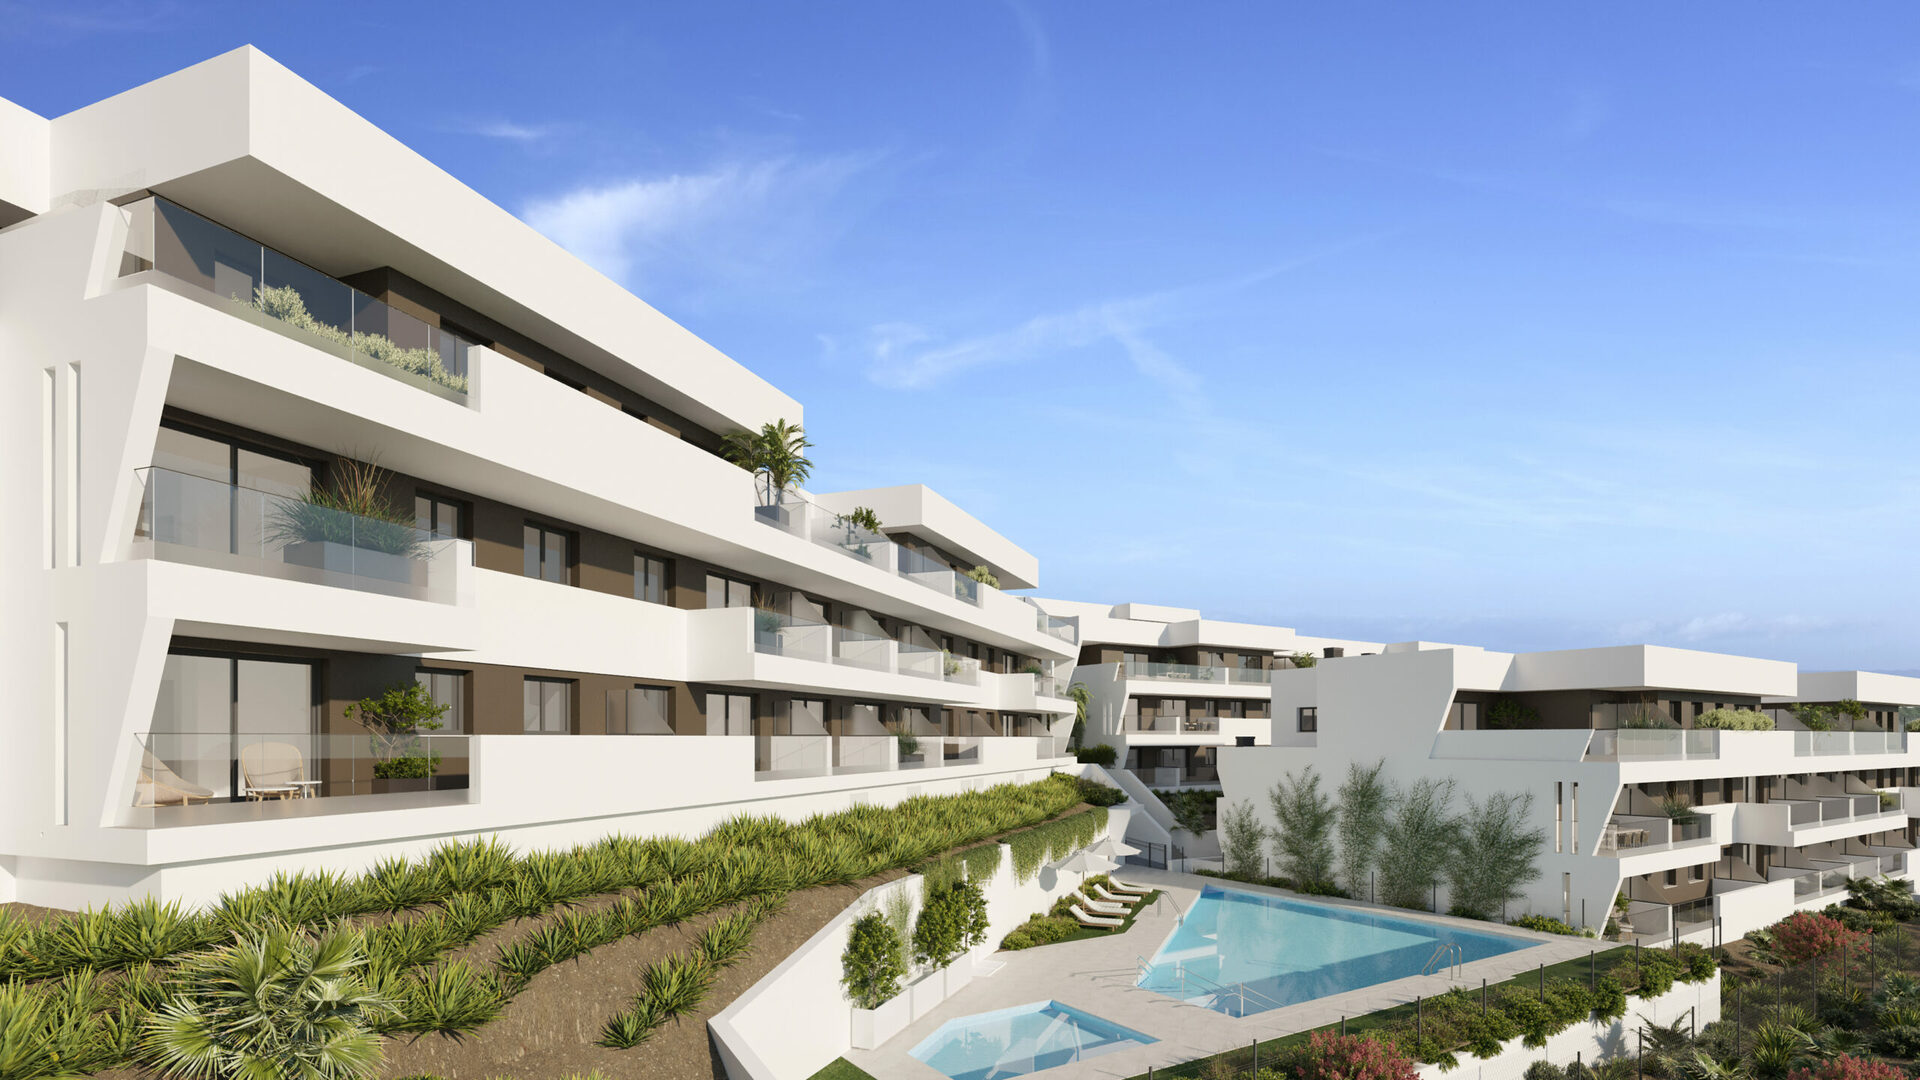 Modern living in the heart of the Costa del Sol